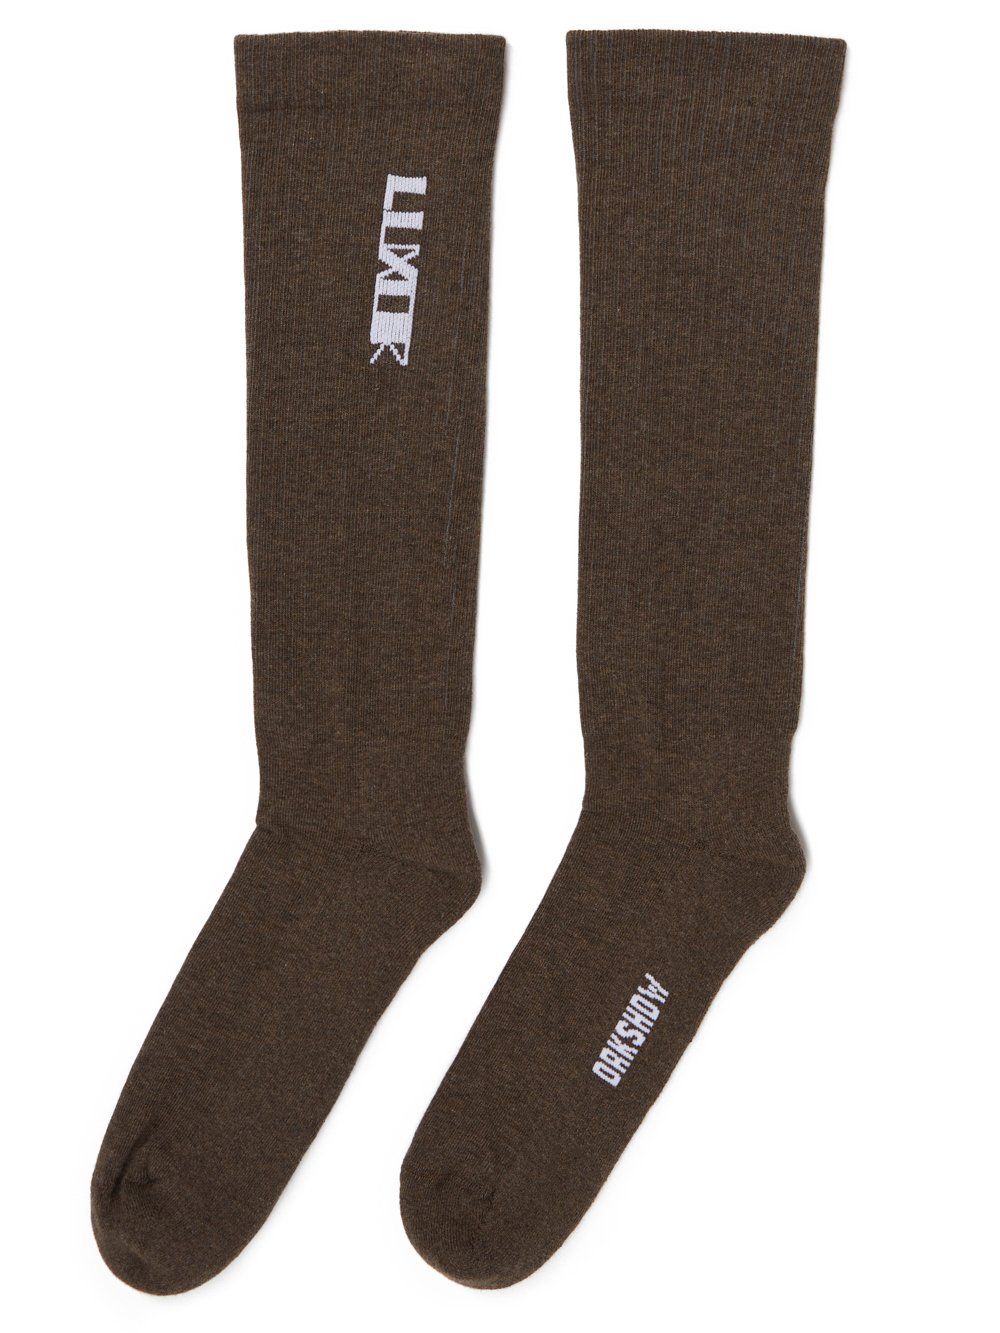 RICK OWENS FW23 LUXOR LUXOR SOCKS IN DUST AND MILK COTTON KNIT